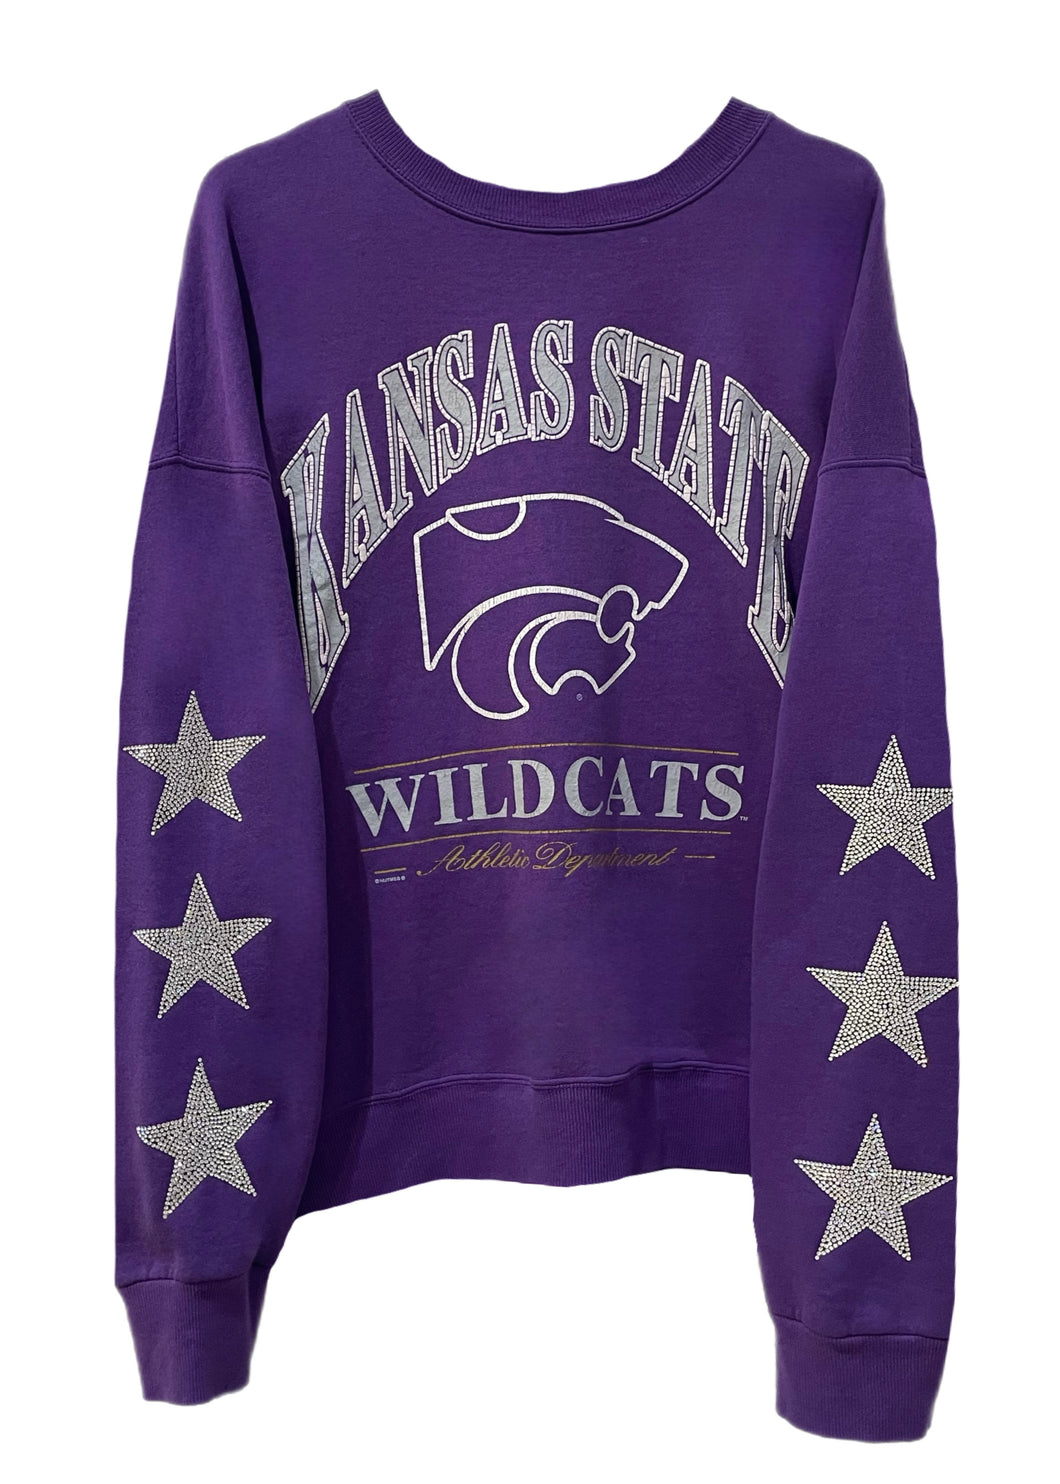 Kansas State University, One of a KIND Vintage Wildcats Sweatshirt with Three Crystal Star Design